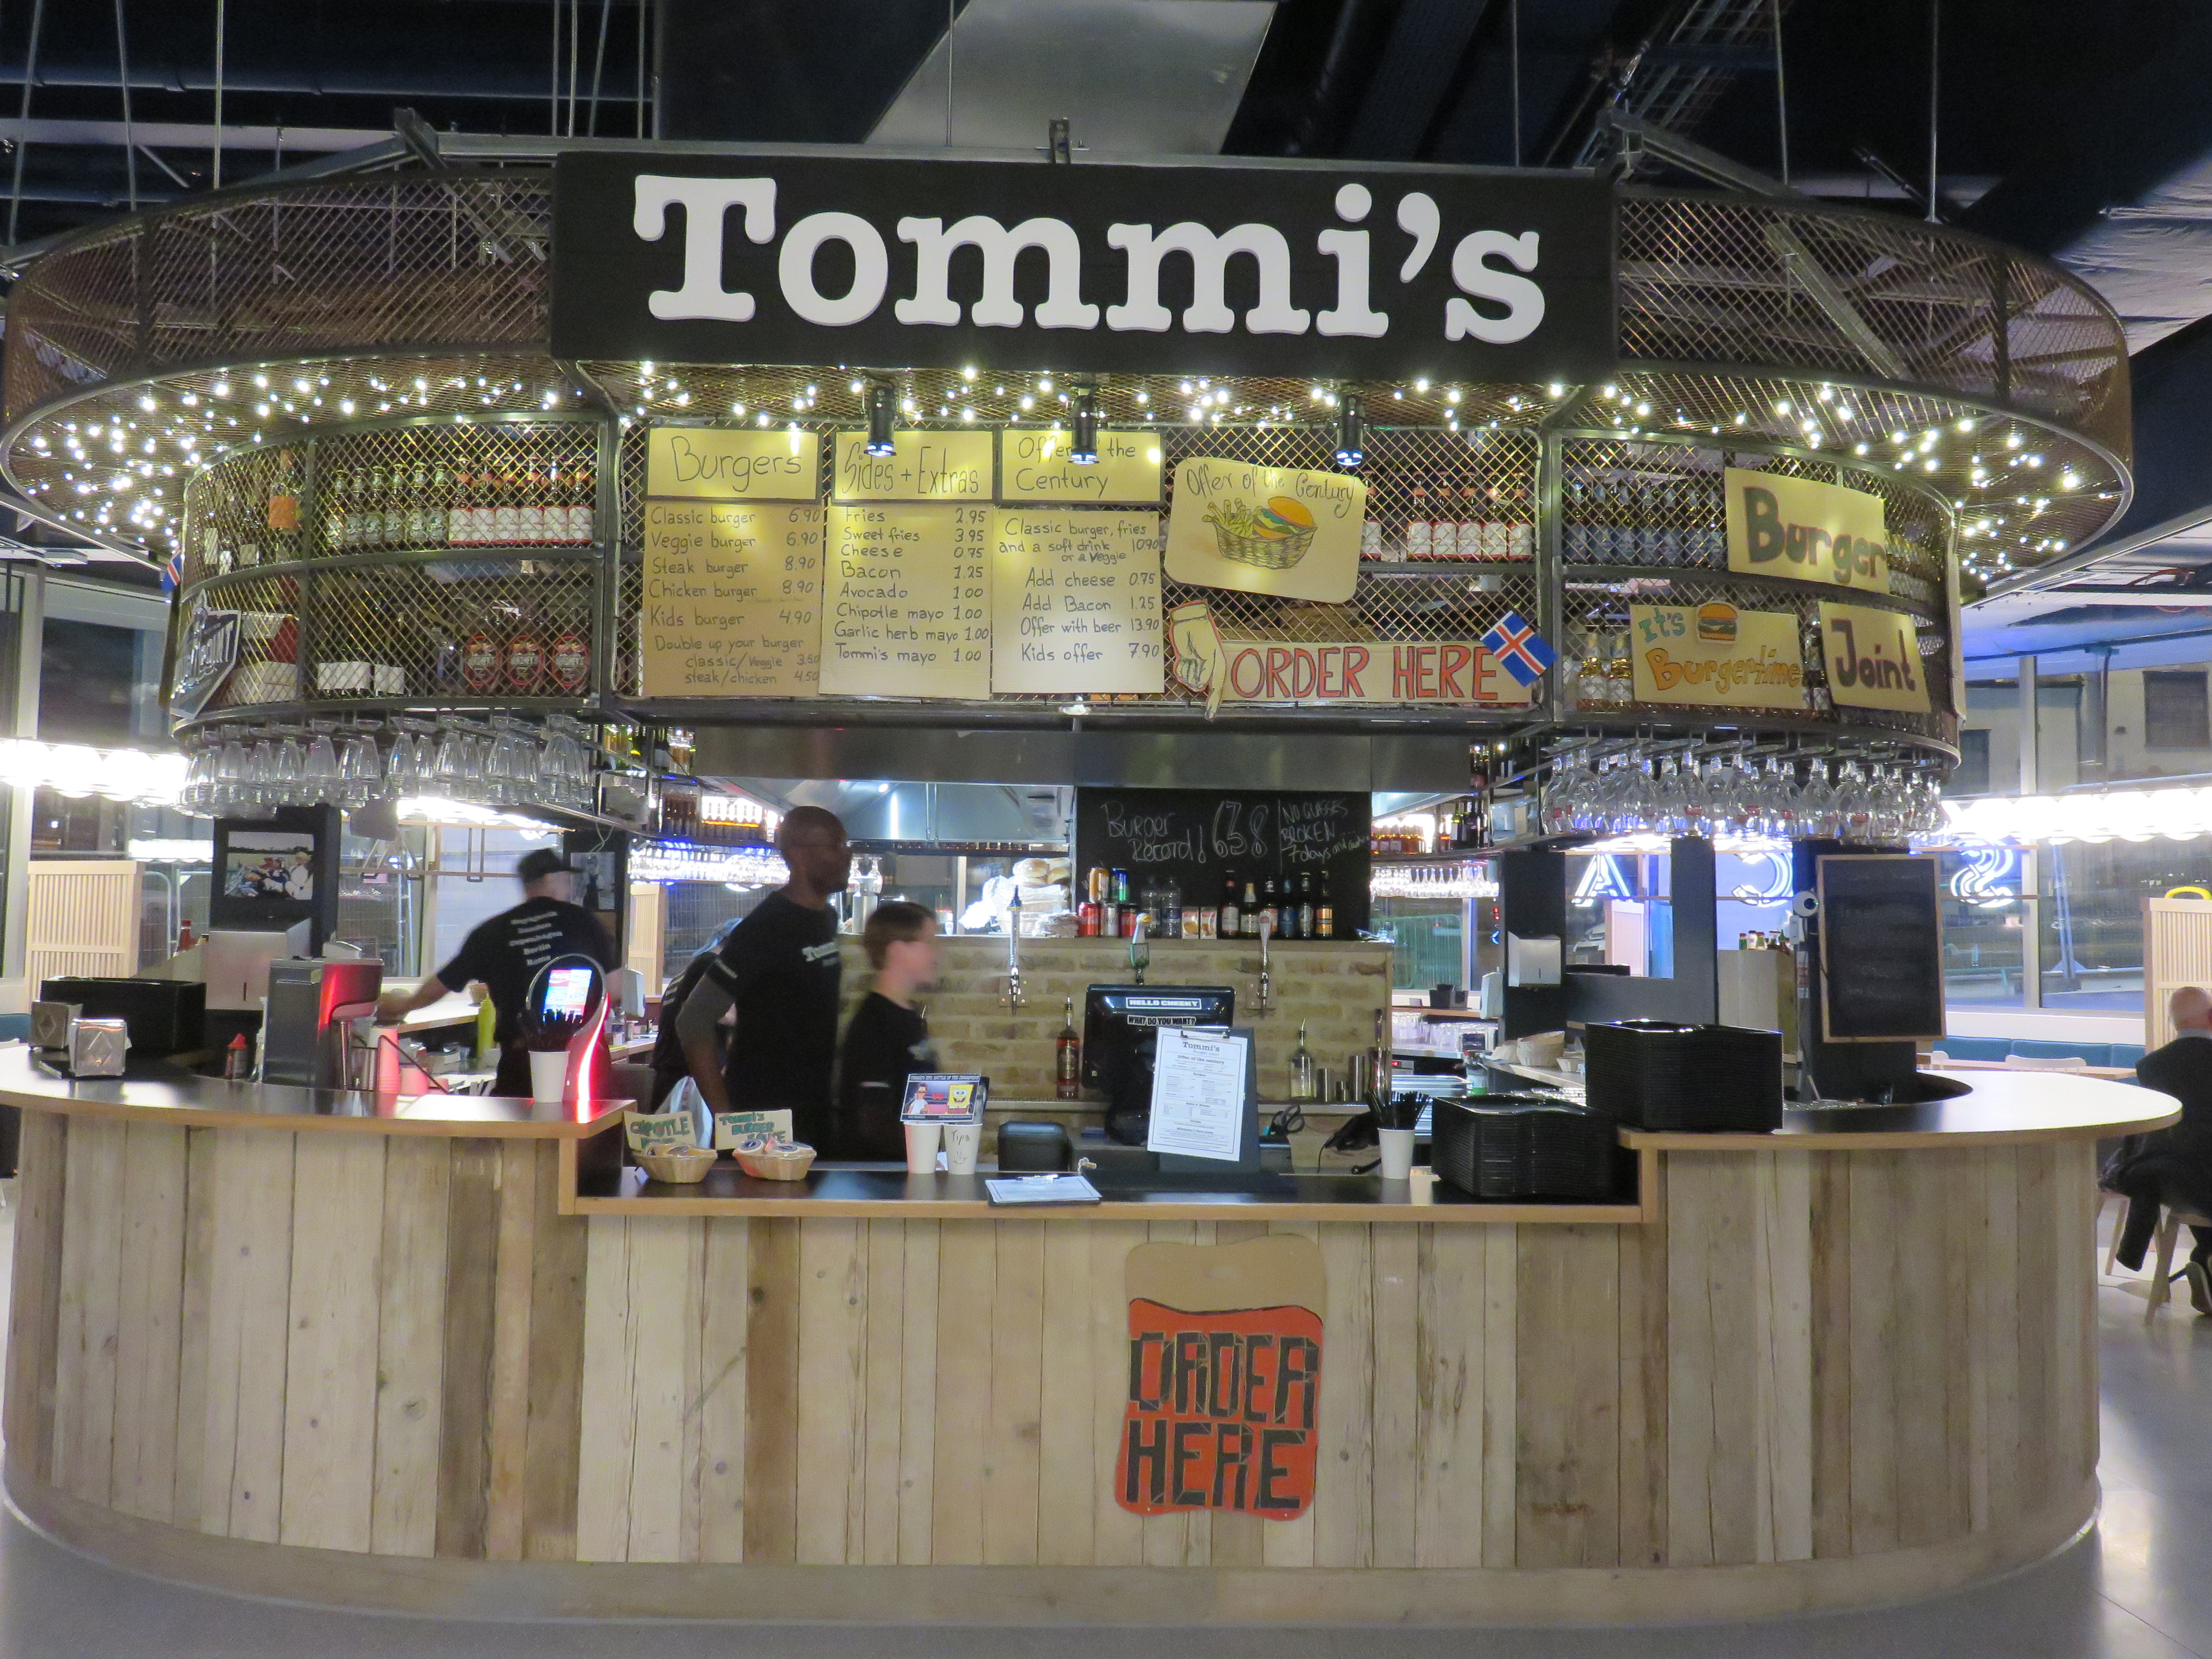 Tommi's Burger Joint at Westgate Oxford | Image Credit Bitten Oxford